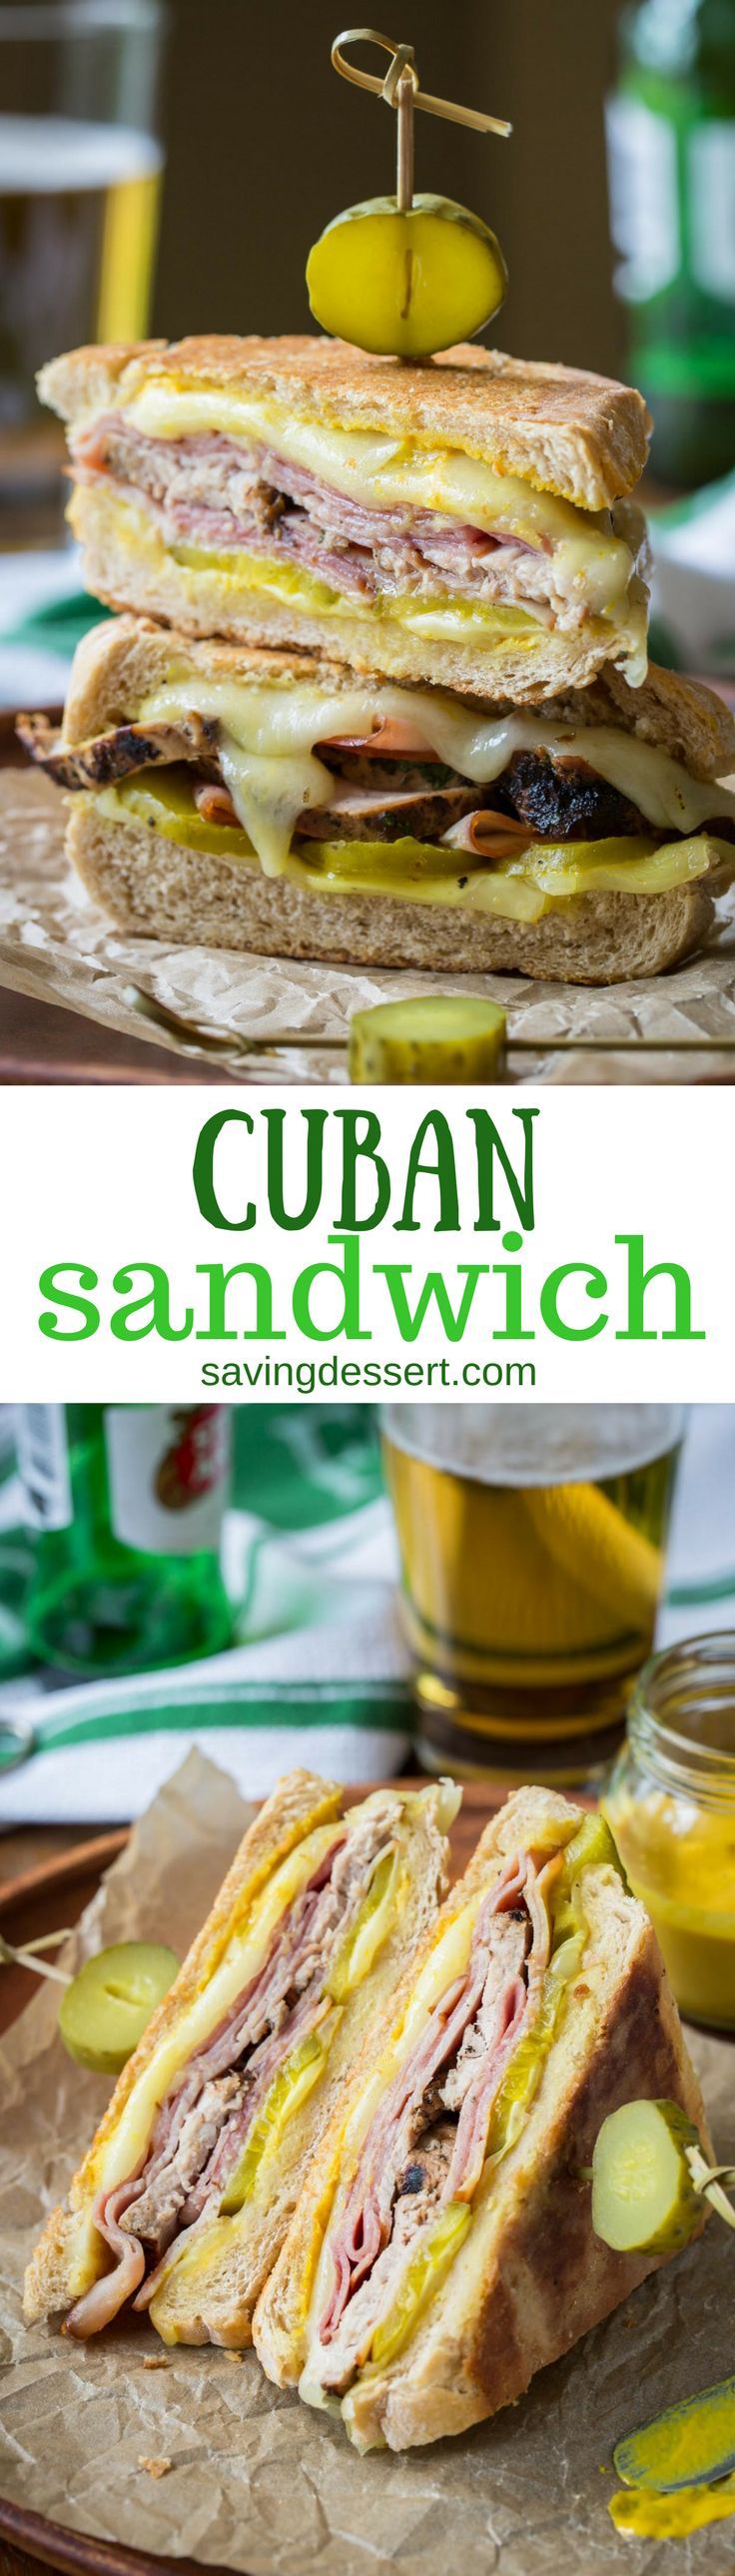 The Cuban Sandwich (Cubano) ~ a hearty and delicious combination of sweet ham, juicy tender pork, melted Swiss cheese, dill